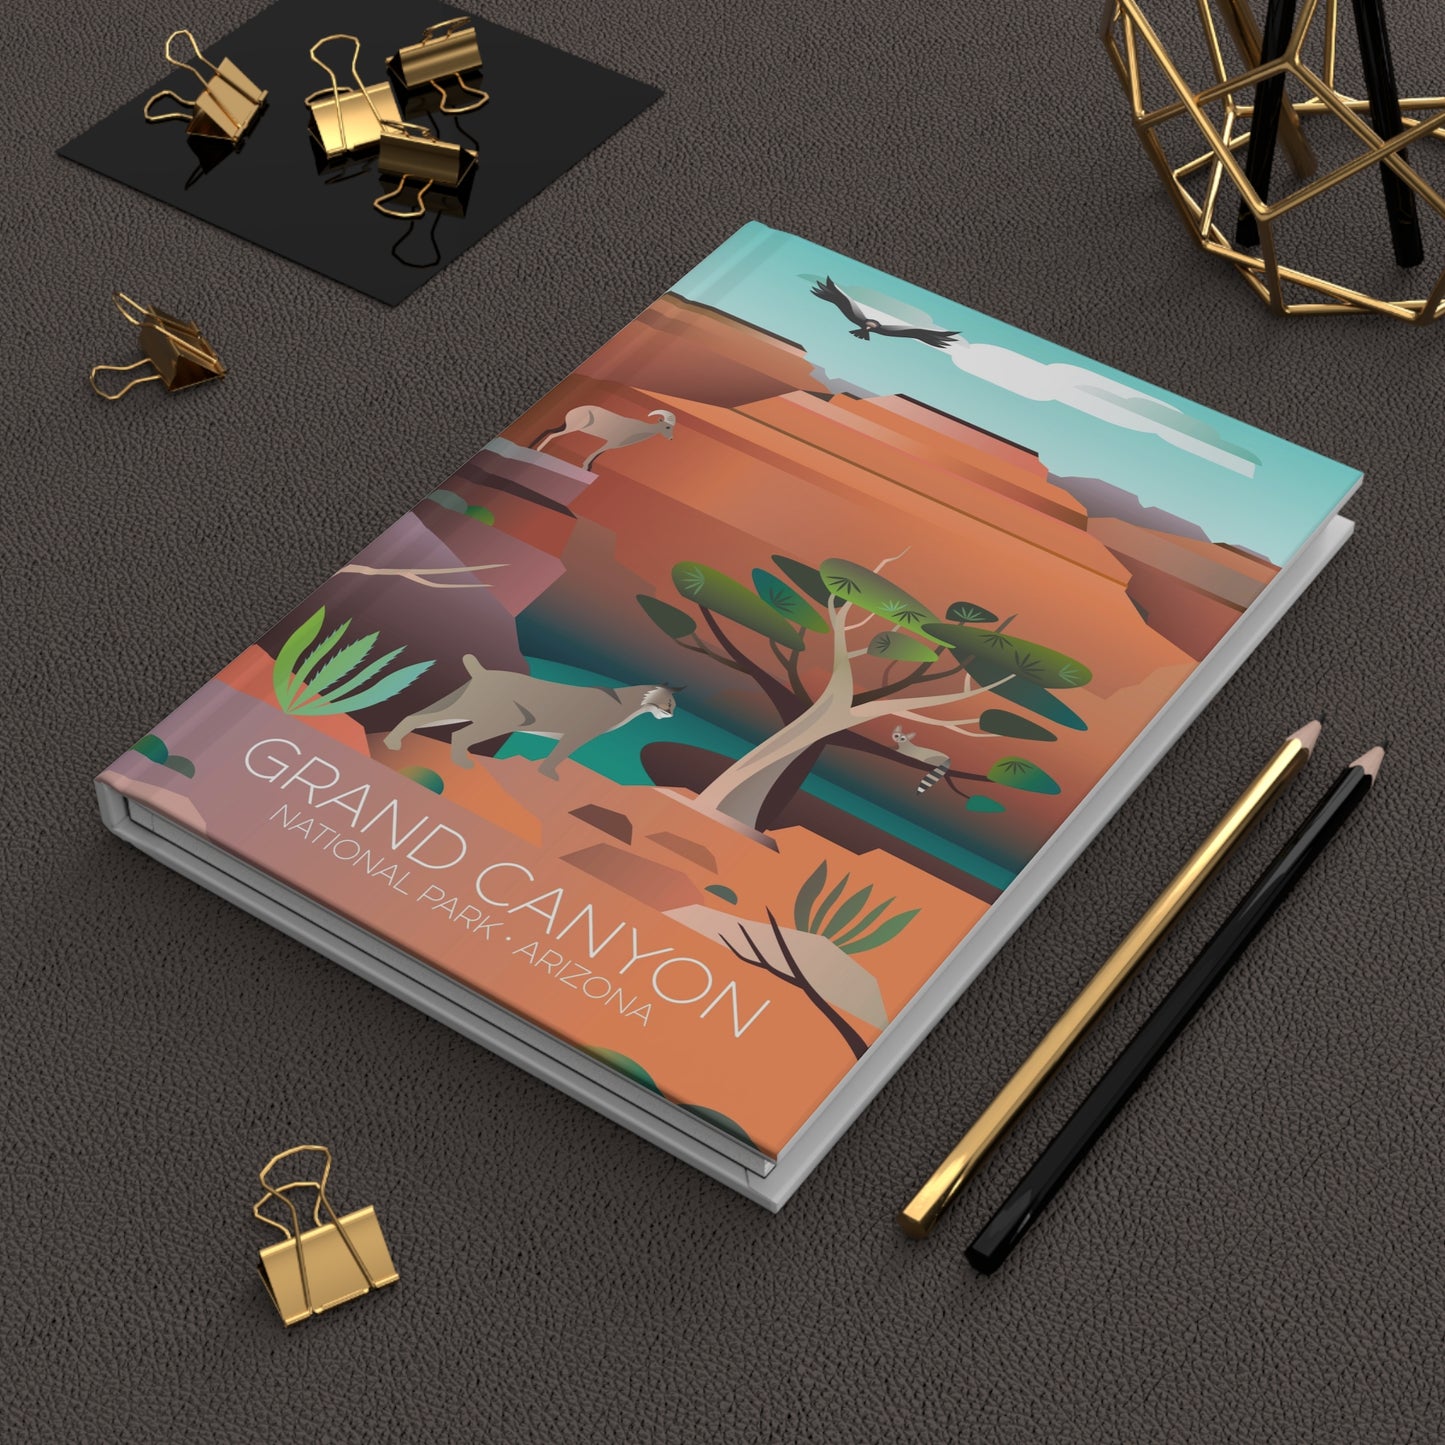 Grand Canyon National Park Hardcover Journal